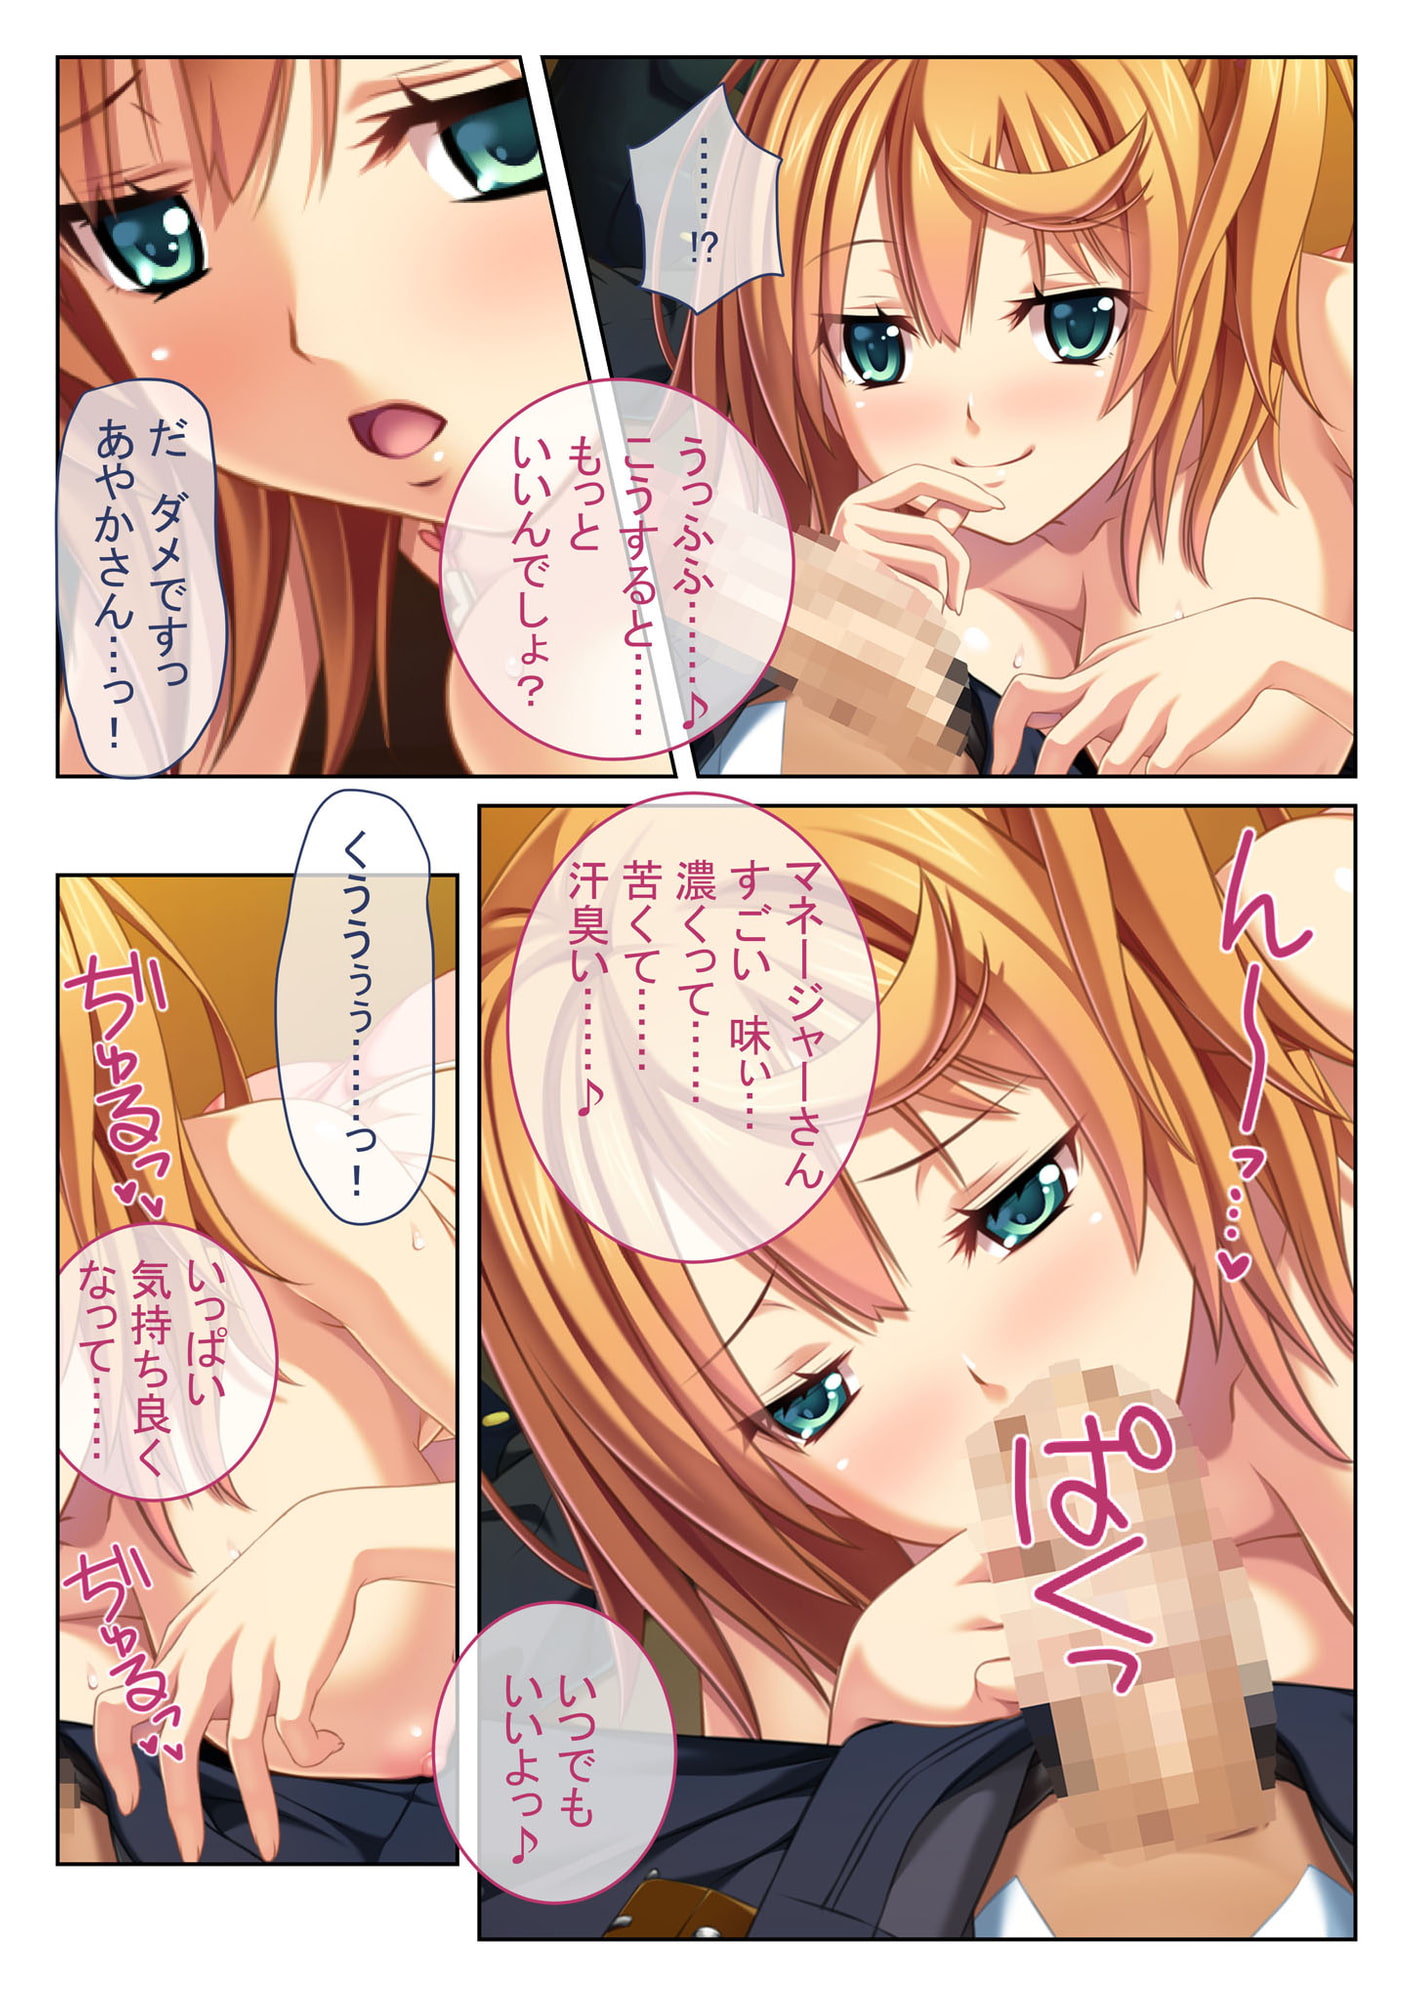 Erotic Lower Body Circumstances of an Idol: Secret Off Stage SEX! [Full Color Comic Ver]